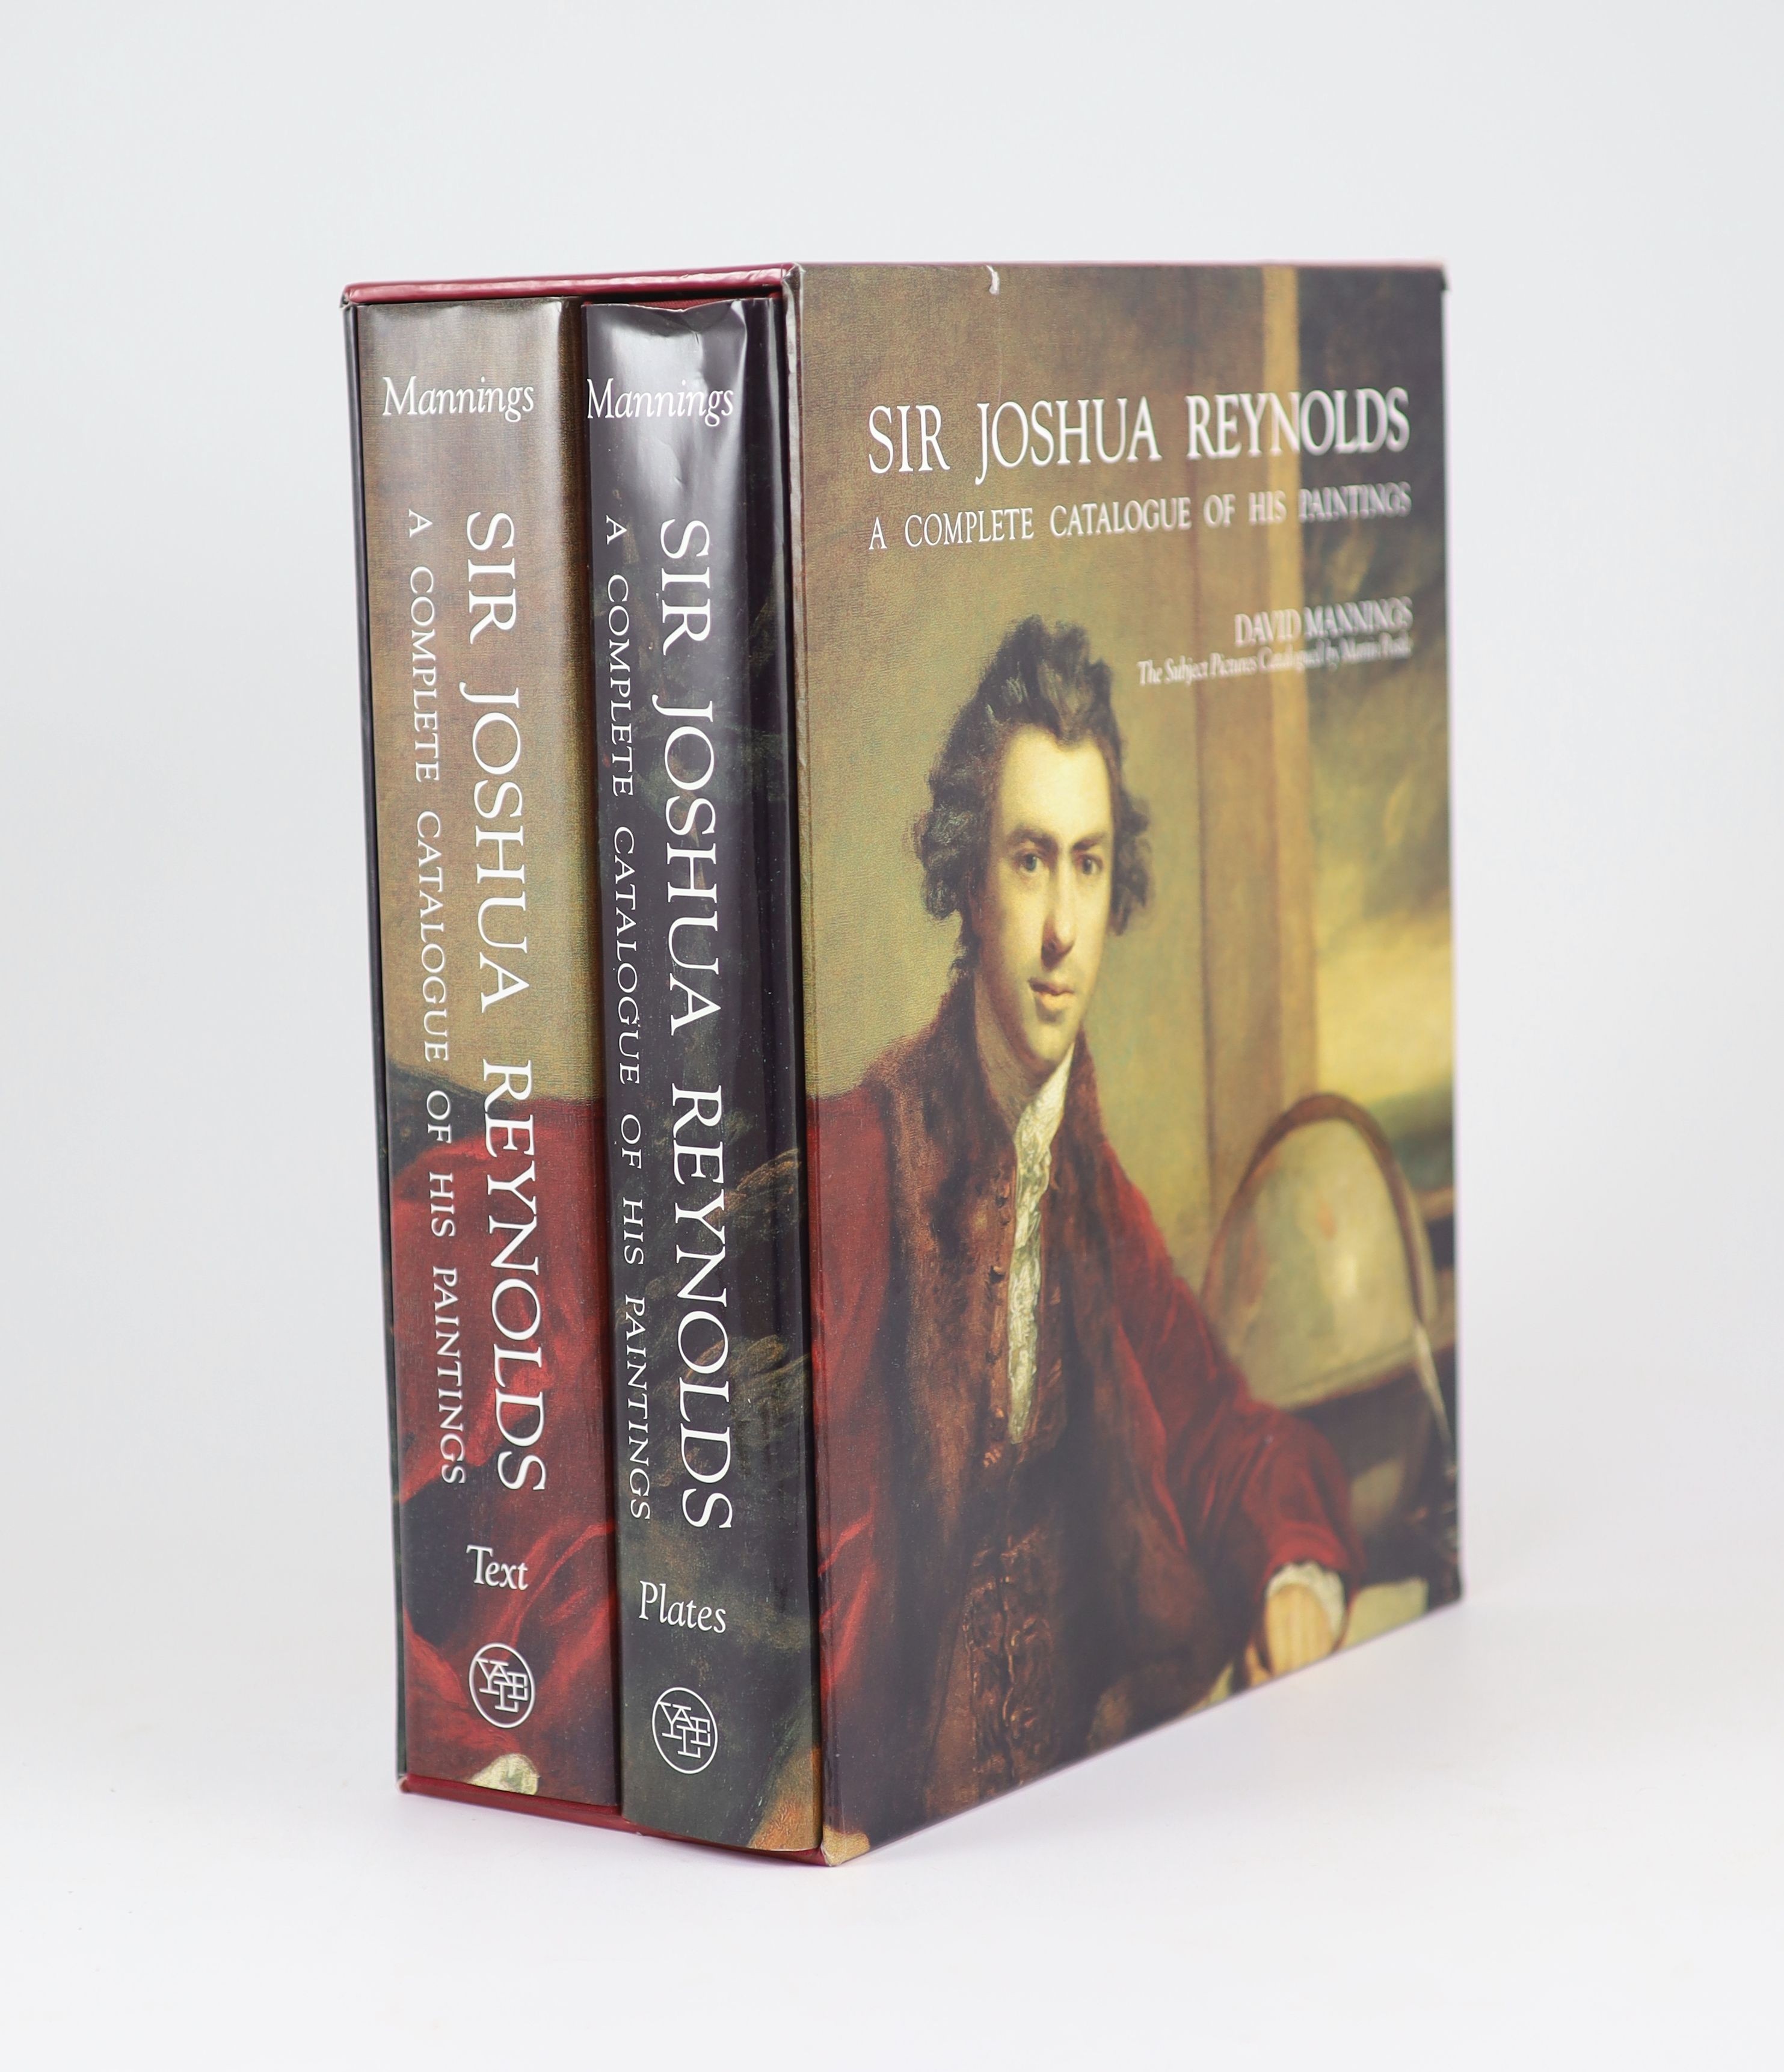 David Mannings. Sir Joshua Reynolds A Complete Catalogue of His Paintings. The Subject Pictures Catalogued by Martin Postle. 2 volumes, large 4to., Yale University Press, 2000. Original cloth bindings in dust wrappers an